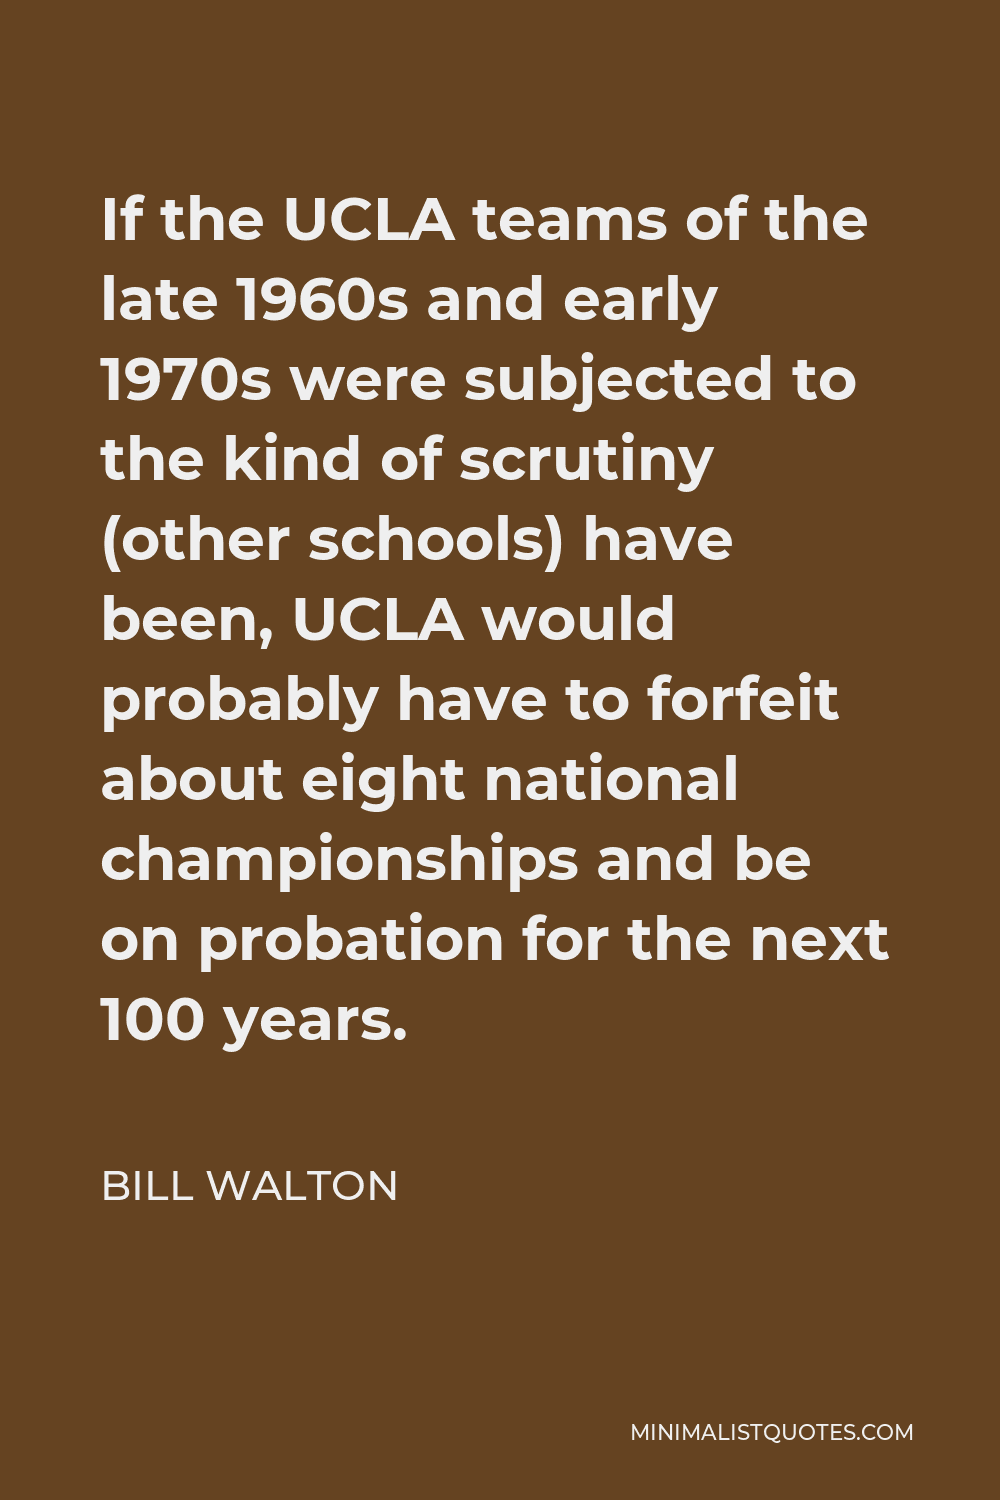 Bill Walton Quote - If the UCLA teams of the late 1960s and early 1970s were subjected to the kind of scrutiny (other schools) have been, UCLA would probably have to forfeit about eight national championships and be on probation for the next 100 years.